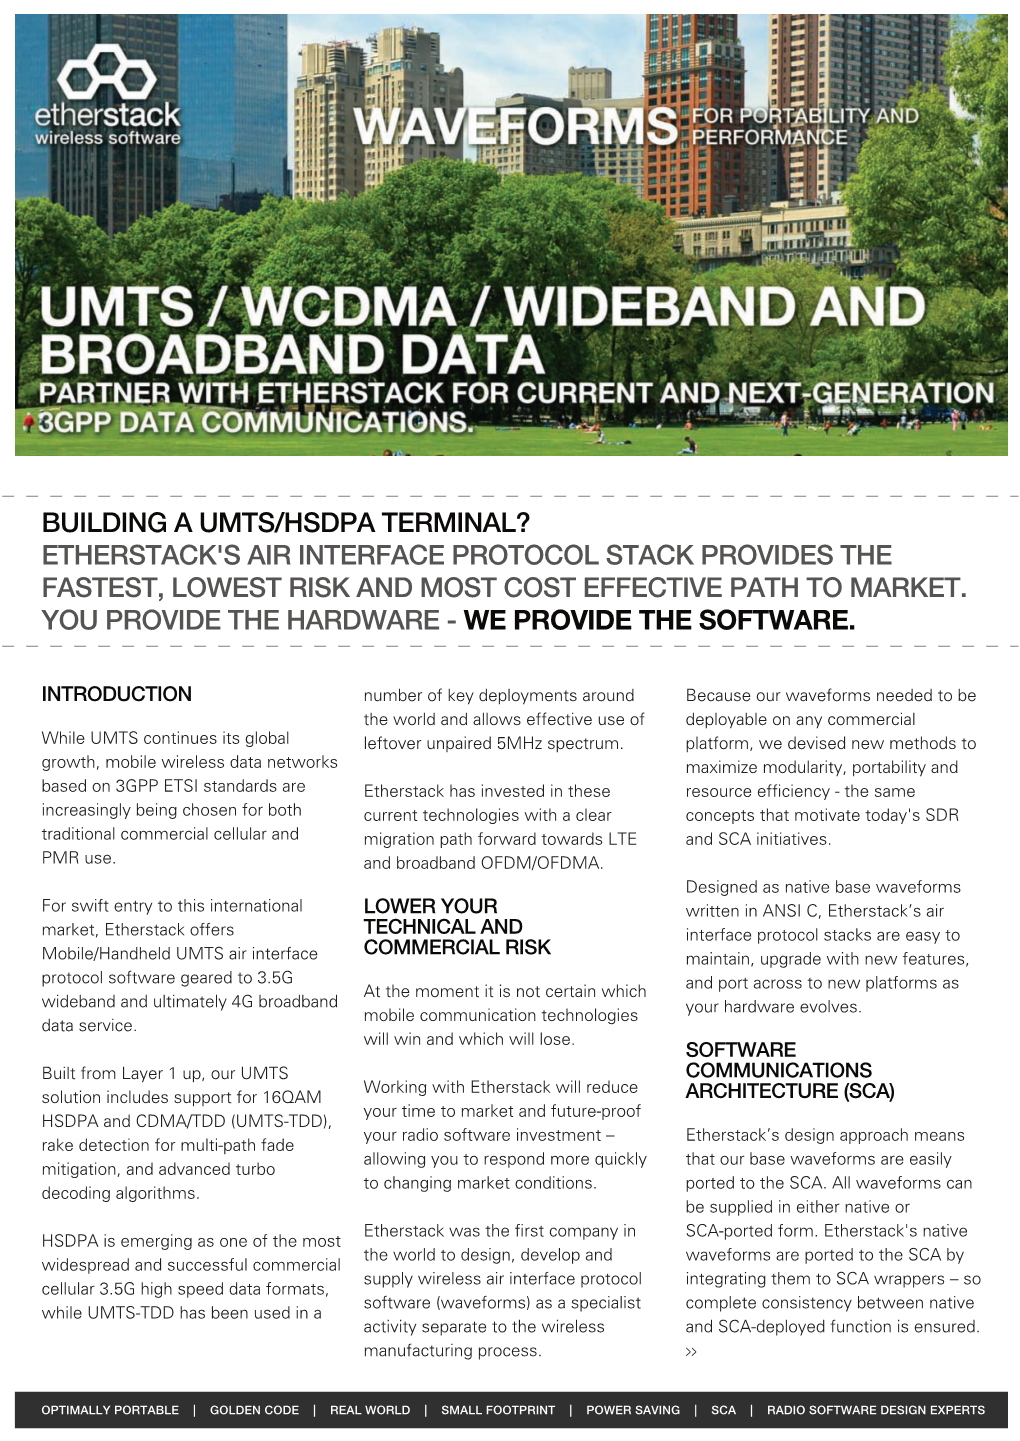 Umts / Wcdma / Wideband and Broadband Data Partner with Etherstack for Current and Next-Generation 3Gpp Data Communications